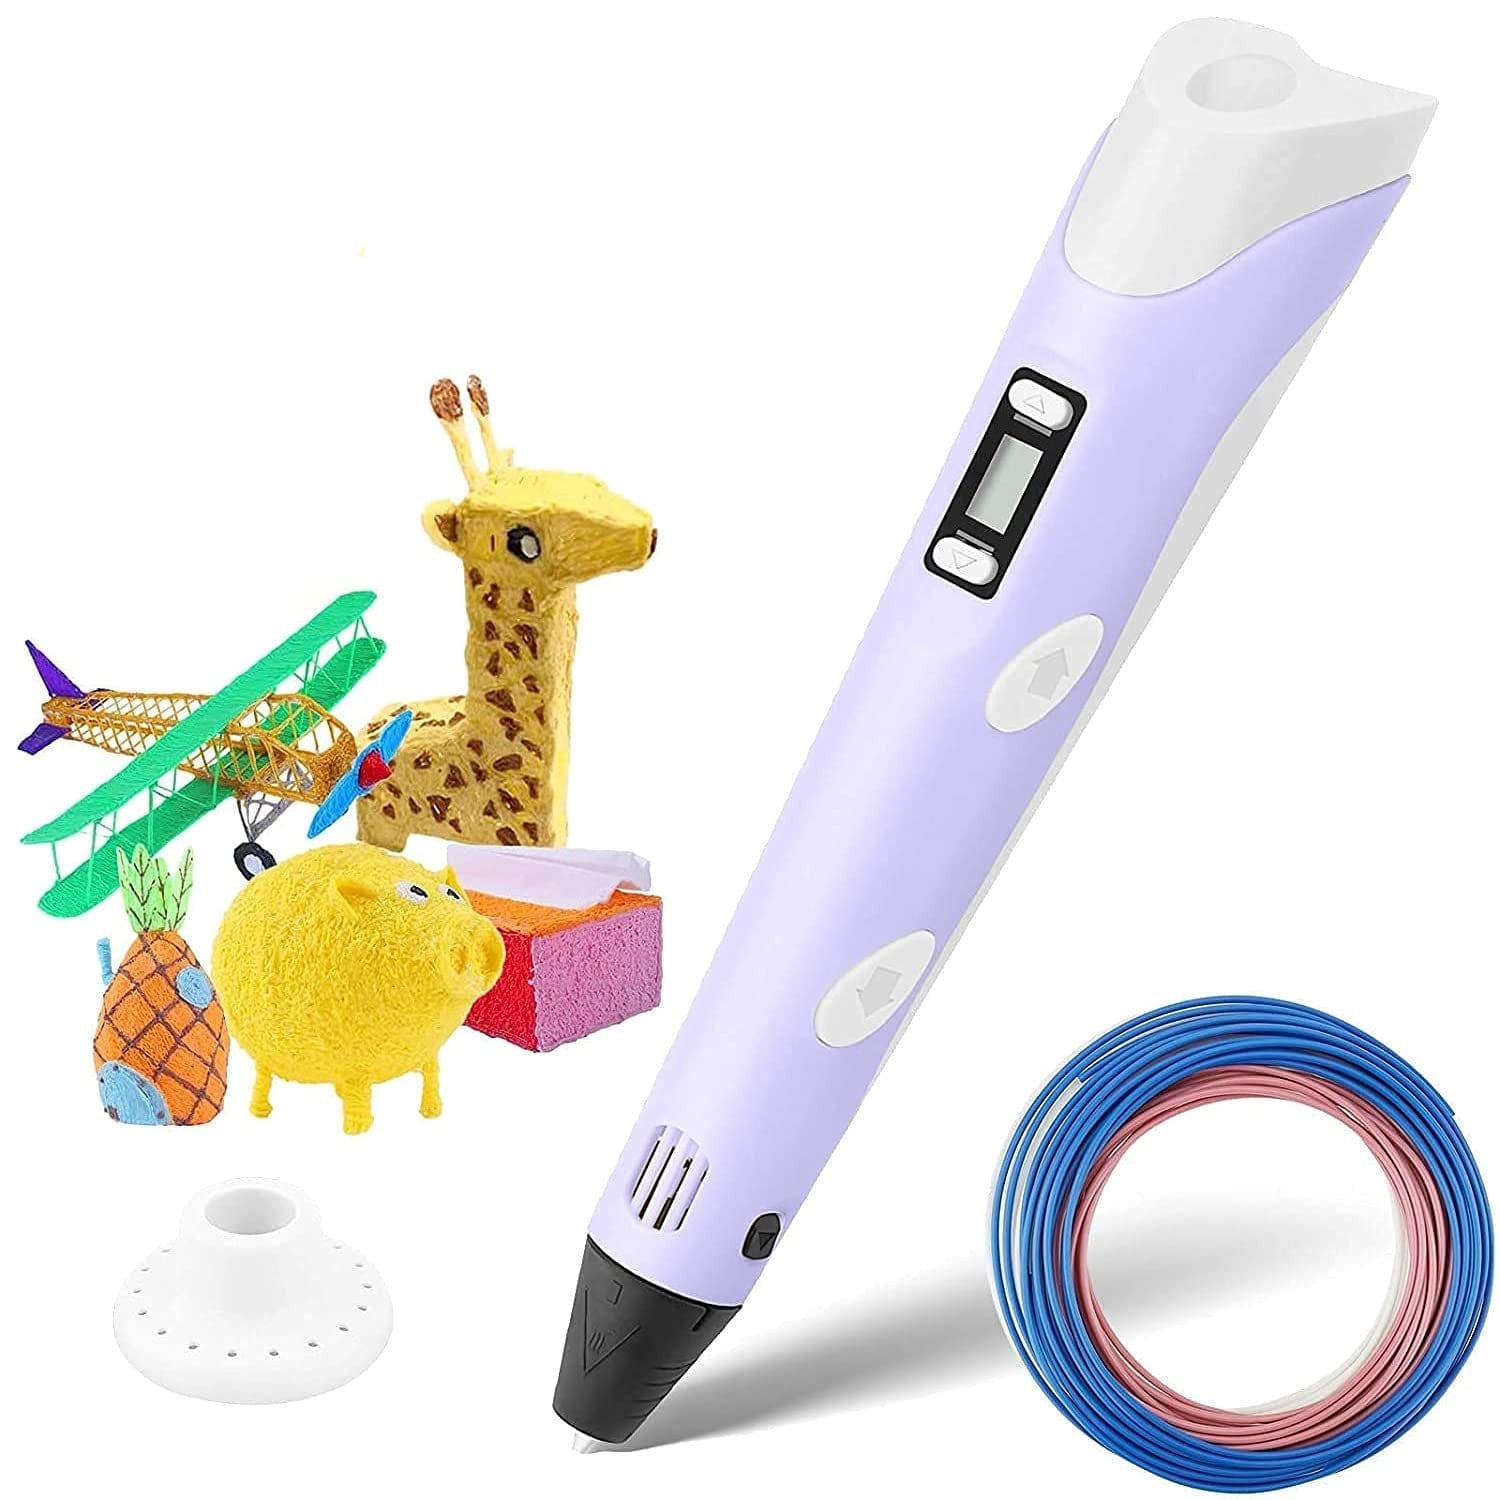 3d Pen For Kids, 3d Printing Pen, 3d Doodle Pen, Perfect Arts Crafts Gift  For Kids & Adults1517